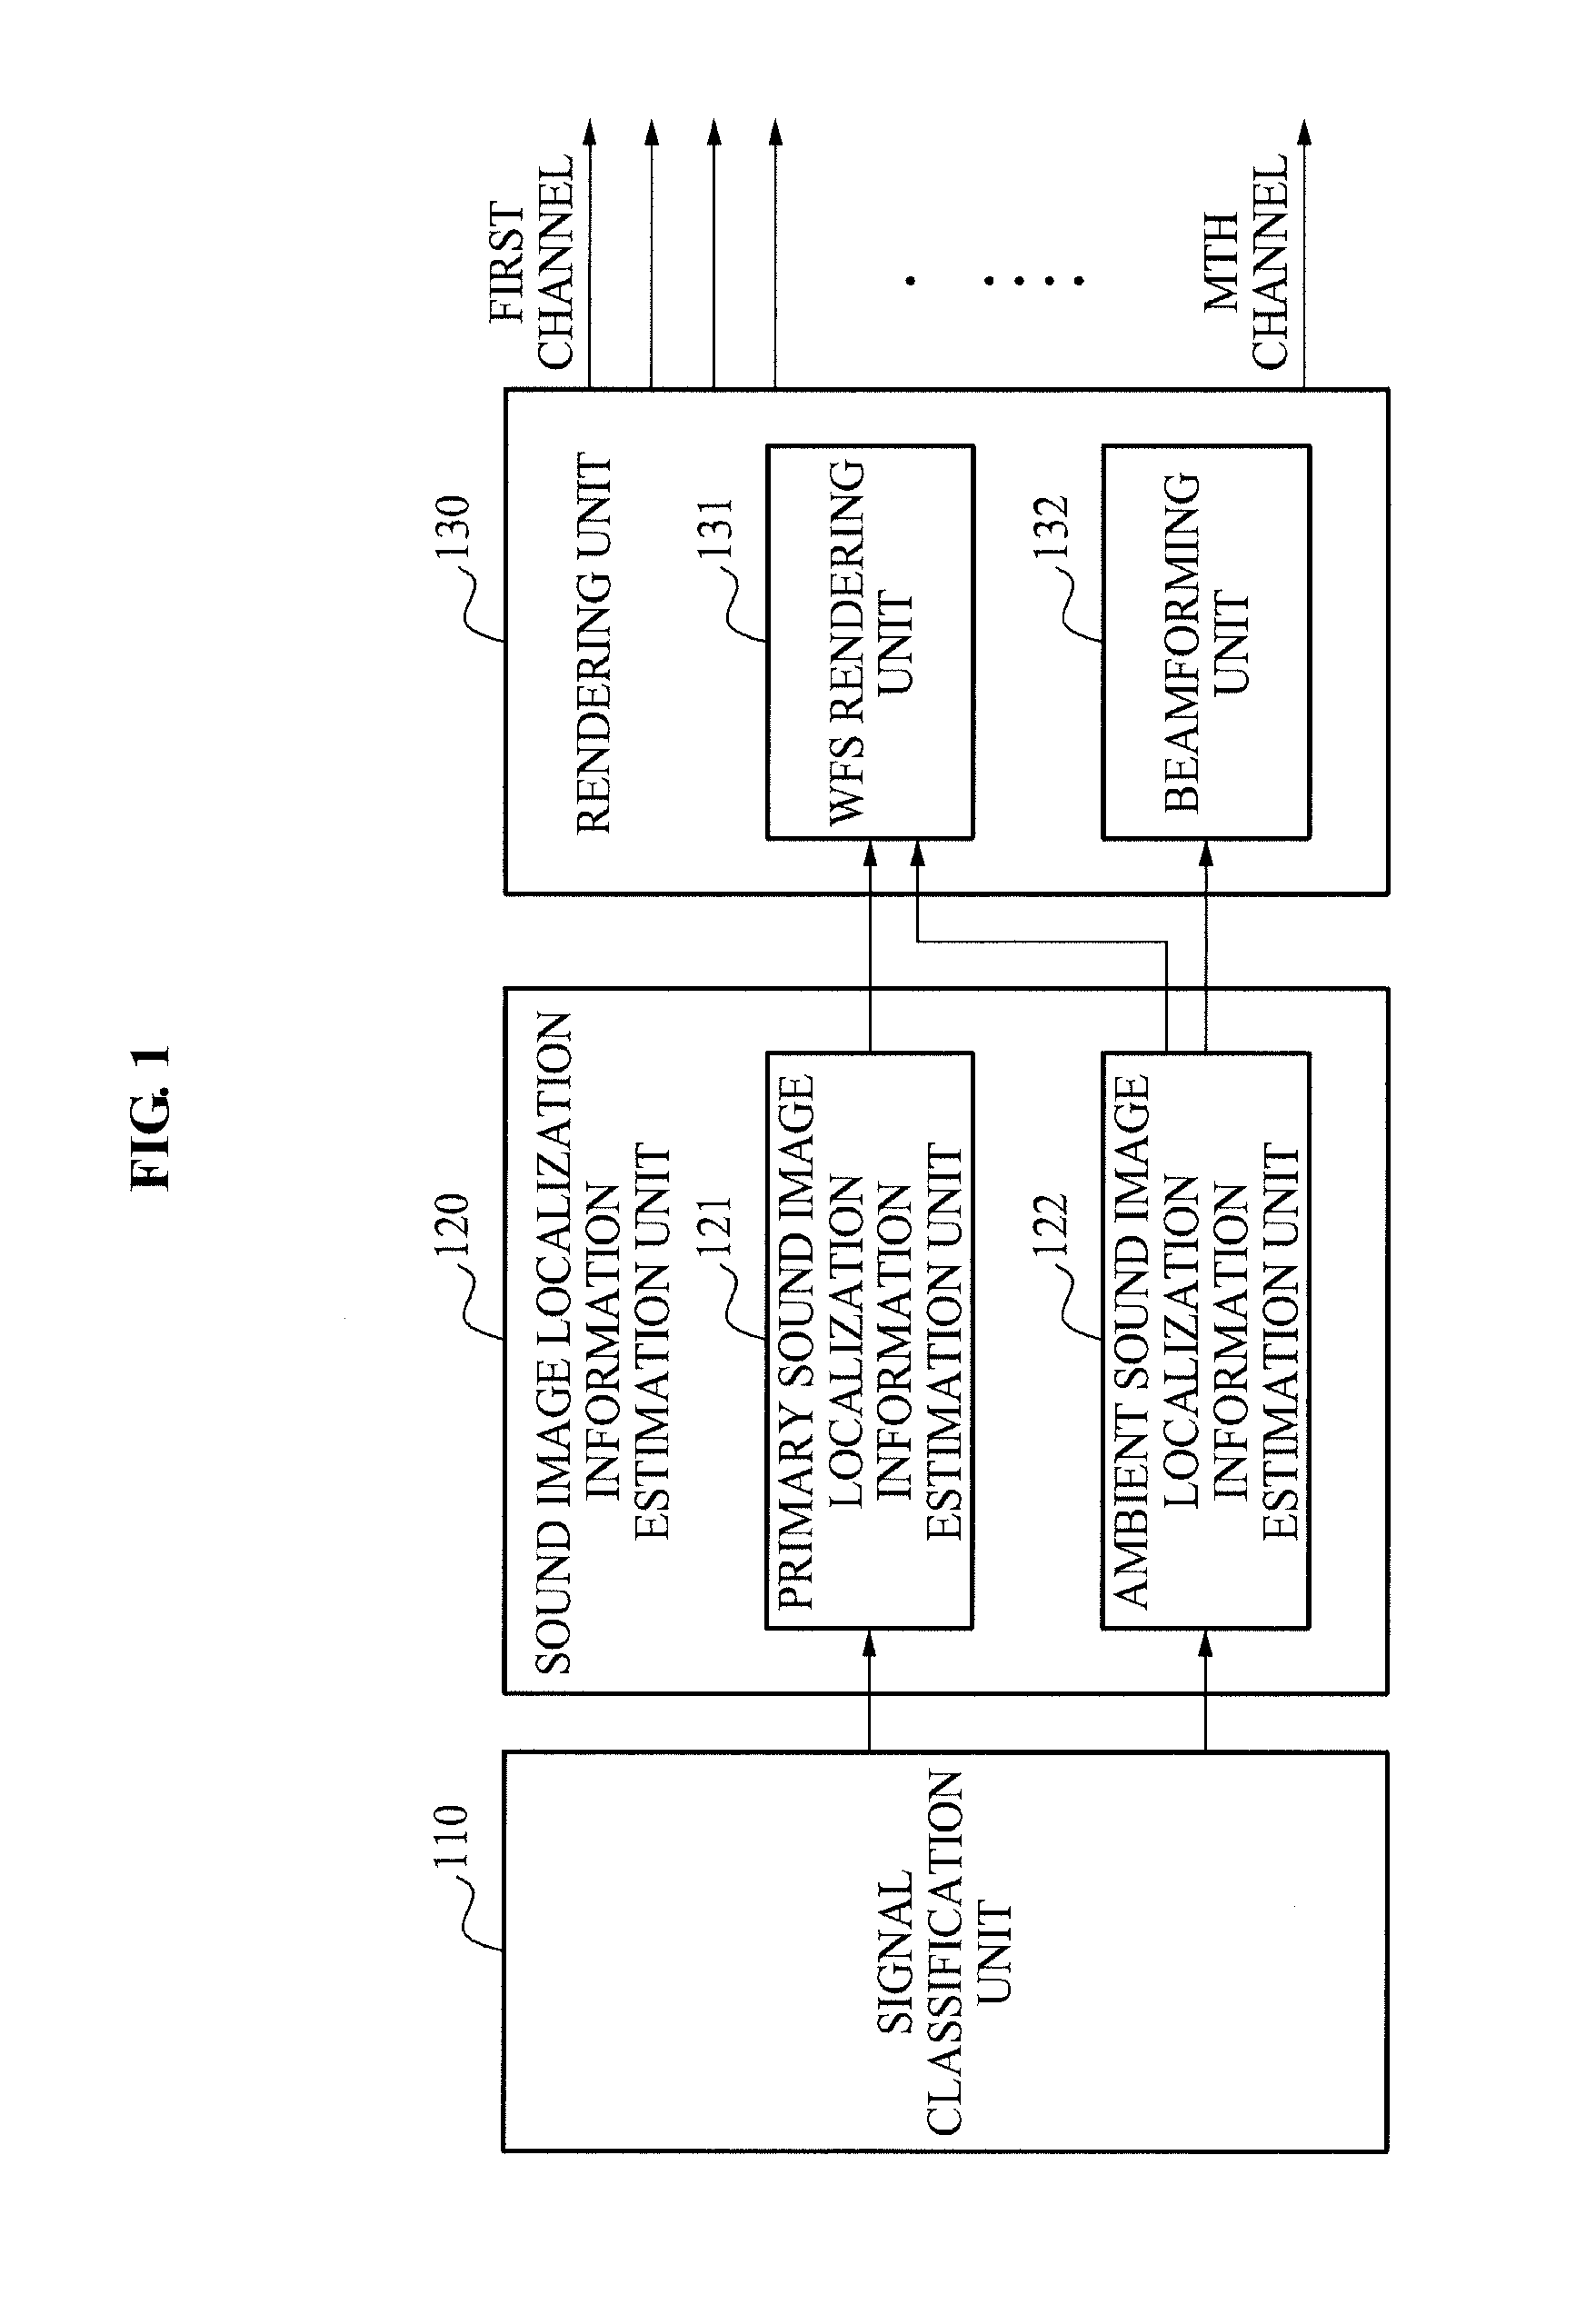 Apparatus and method of reproducing surround wave field using wave field synthesis based on speaker array